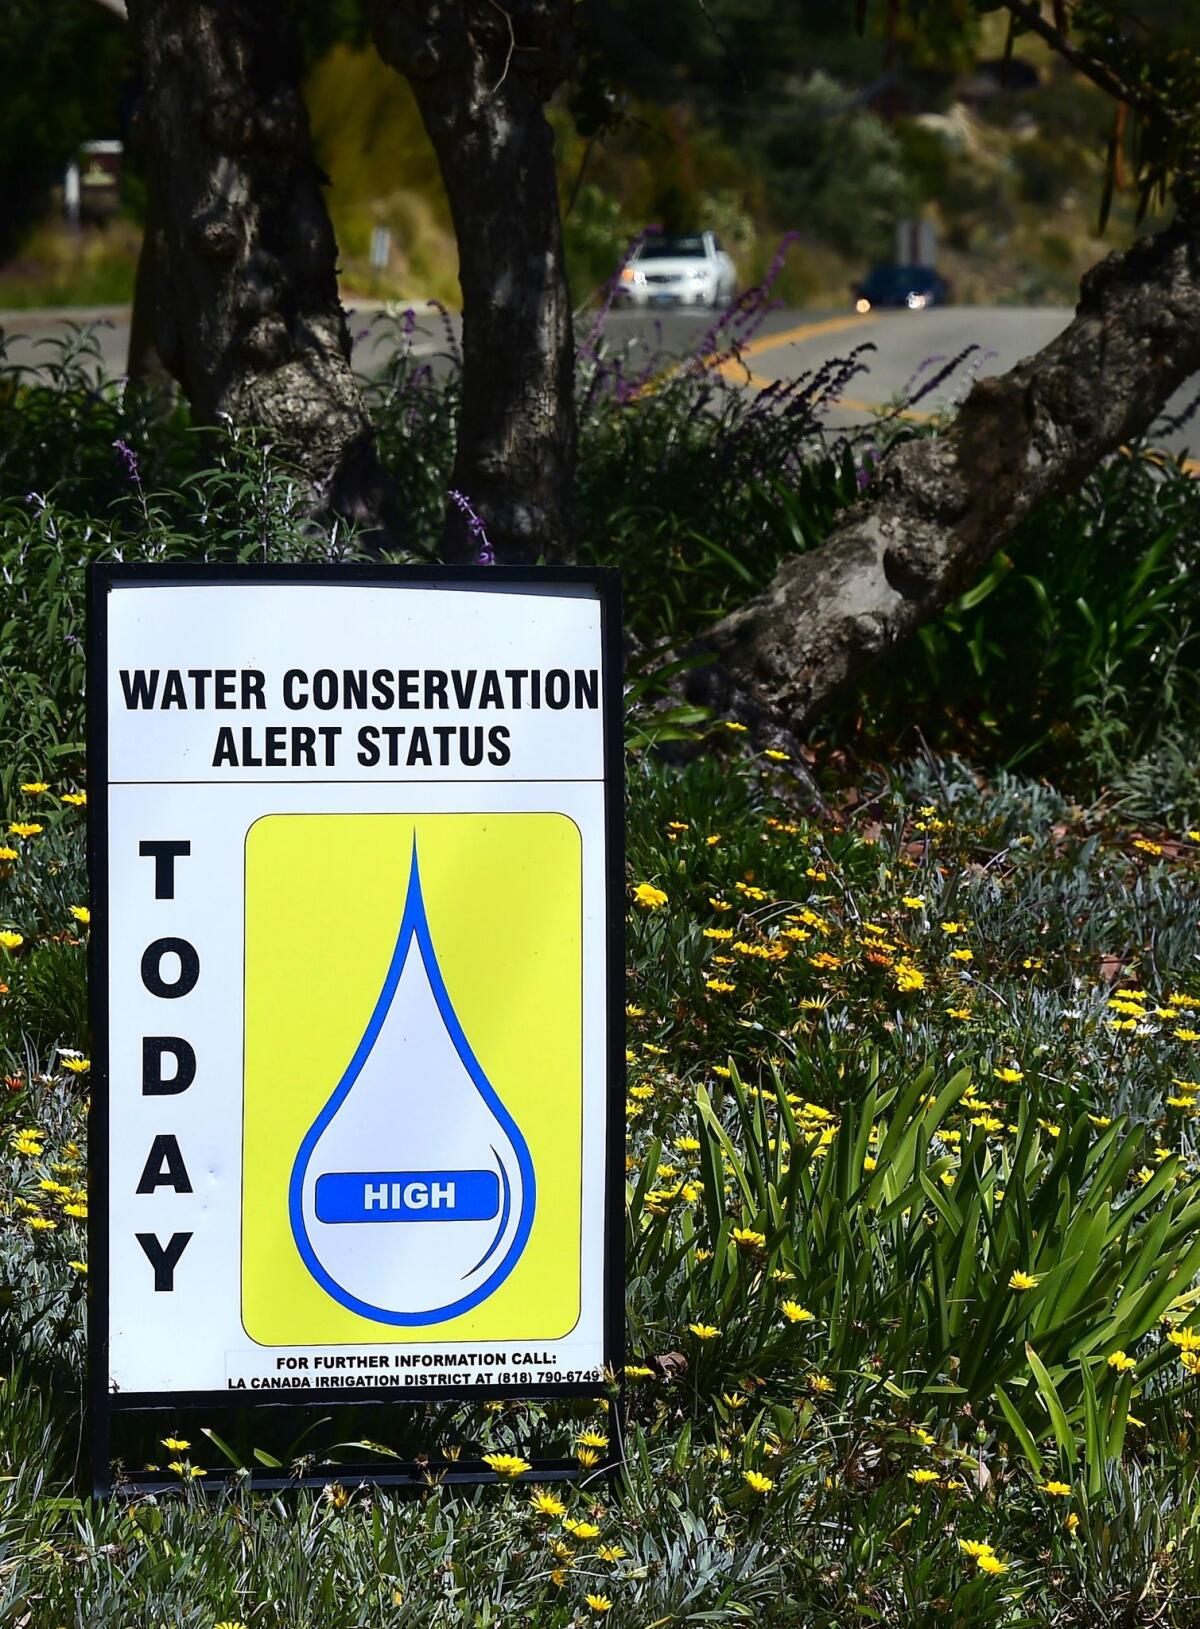 A sign posted roadside warns passing motorists of the Water Conservation Alert Status on April 8, 2015 in La Cañada Flintridge, Calif.